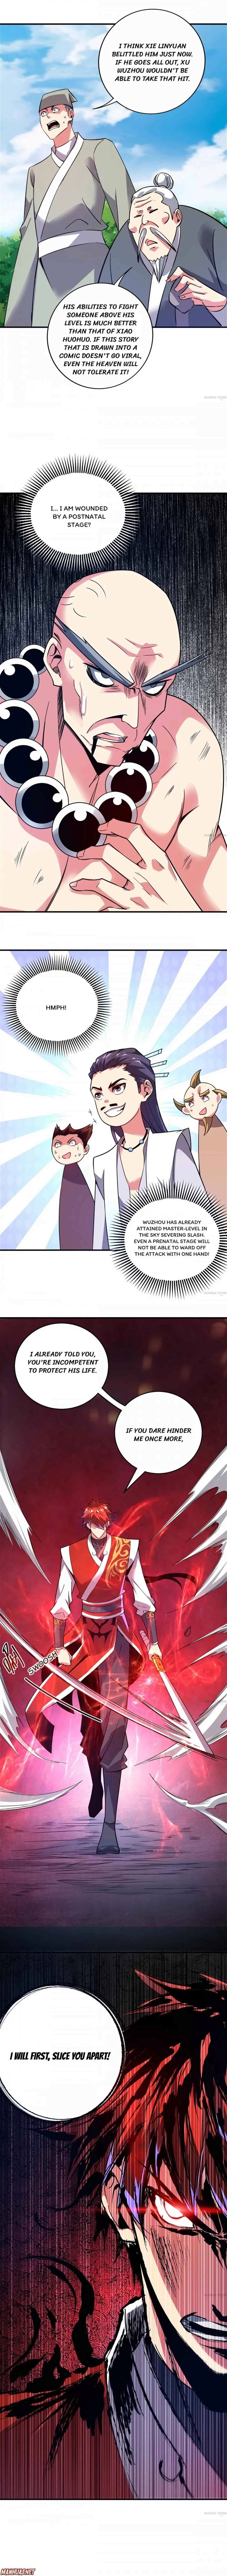 The First Son-In-Law Vanguard of All Time Chapter 57 page 6